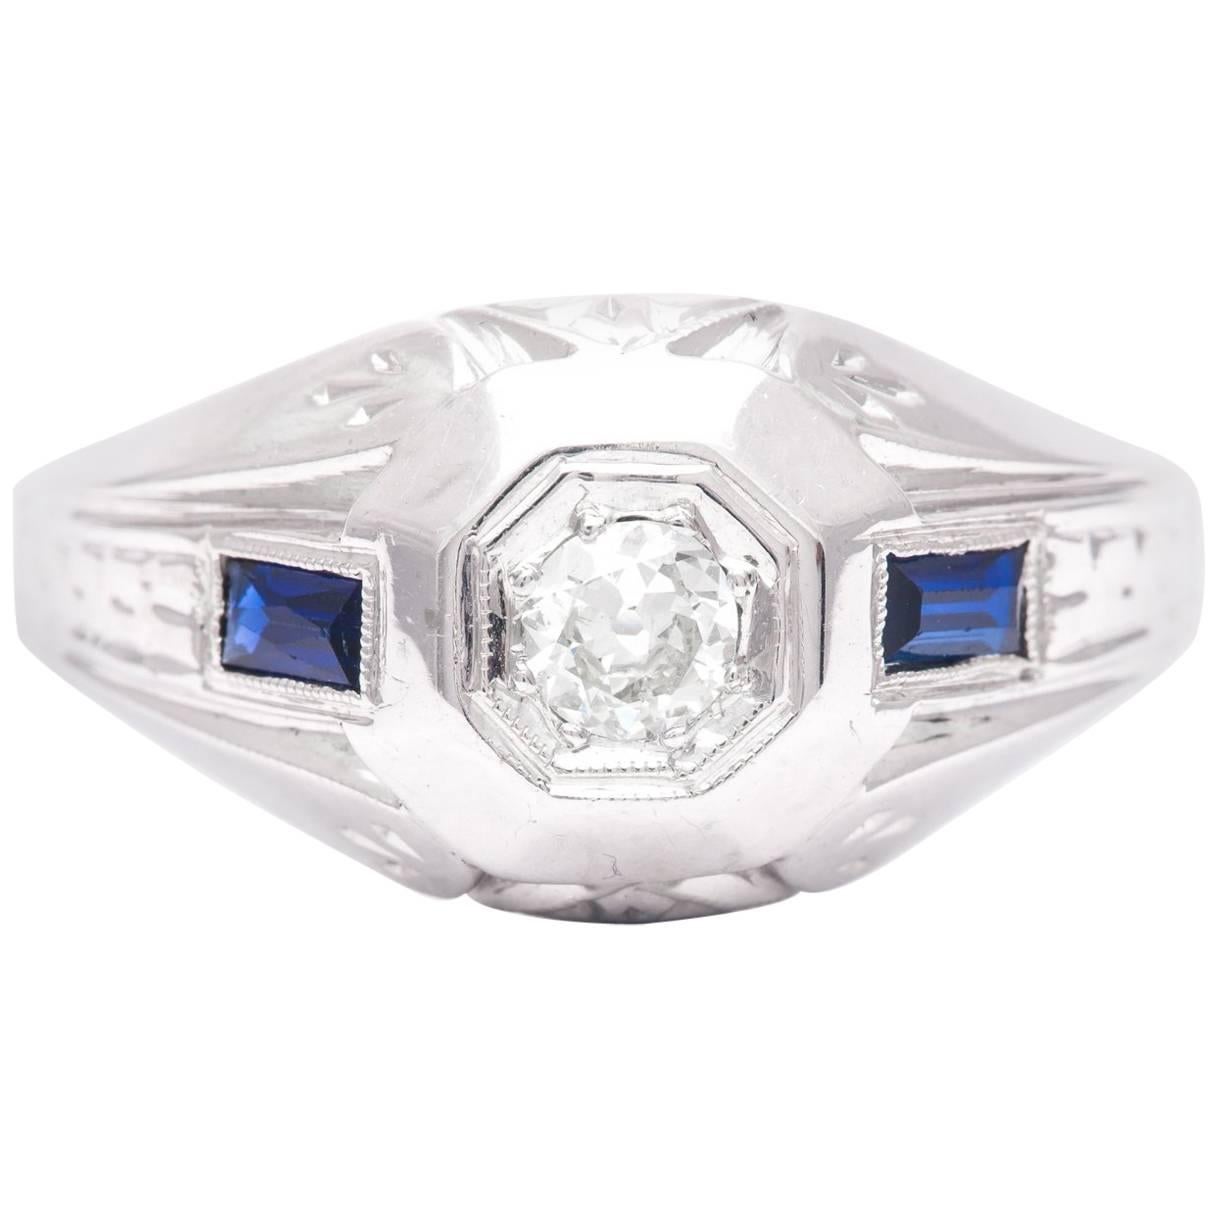 Art Deco Mens Diamond and Sapphire Ring in 18 Karat White Gold For Sale